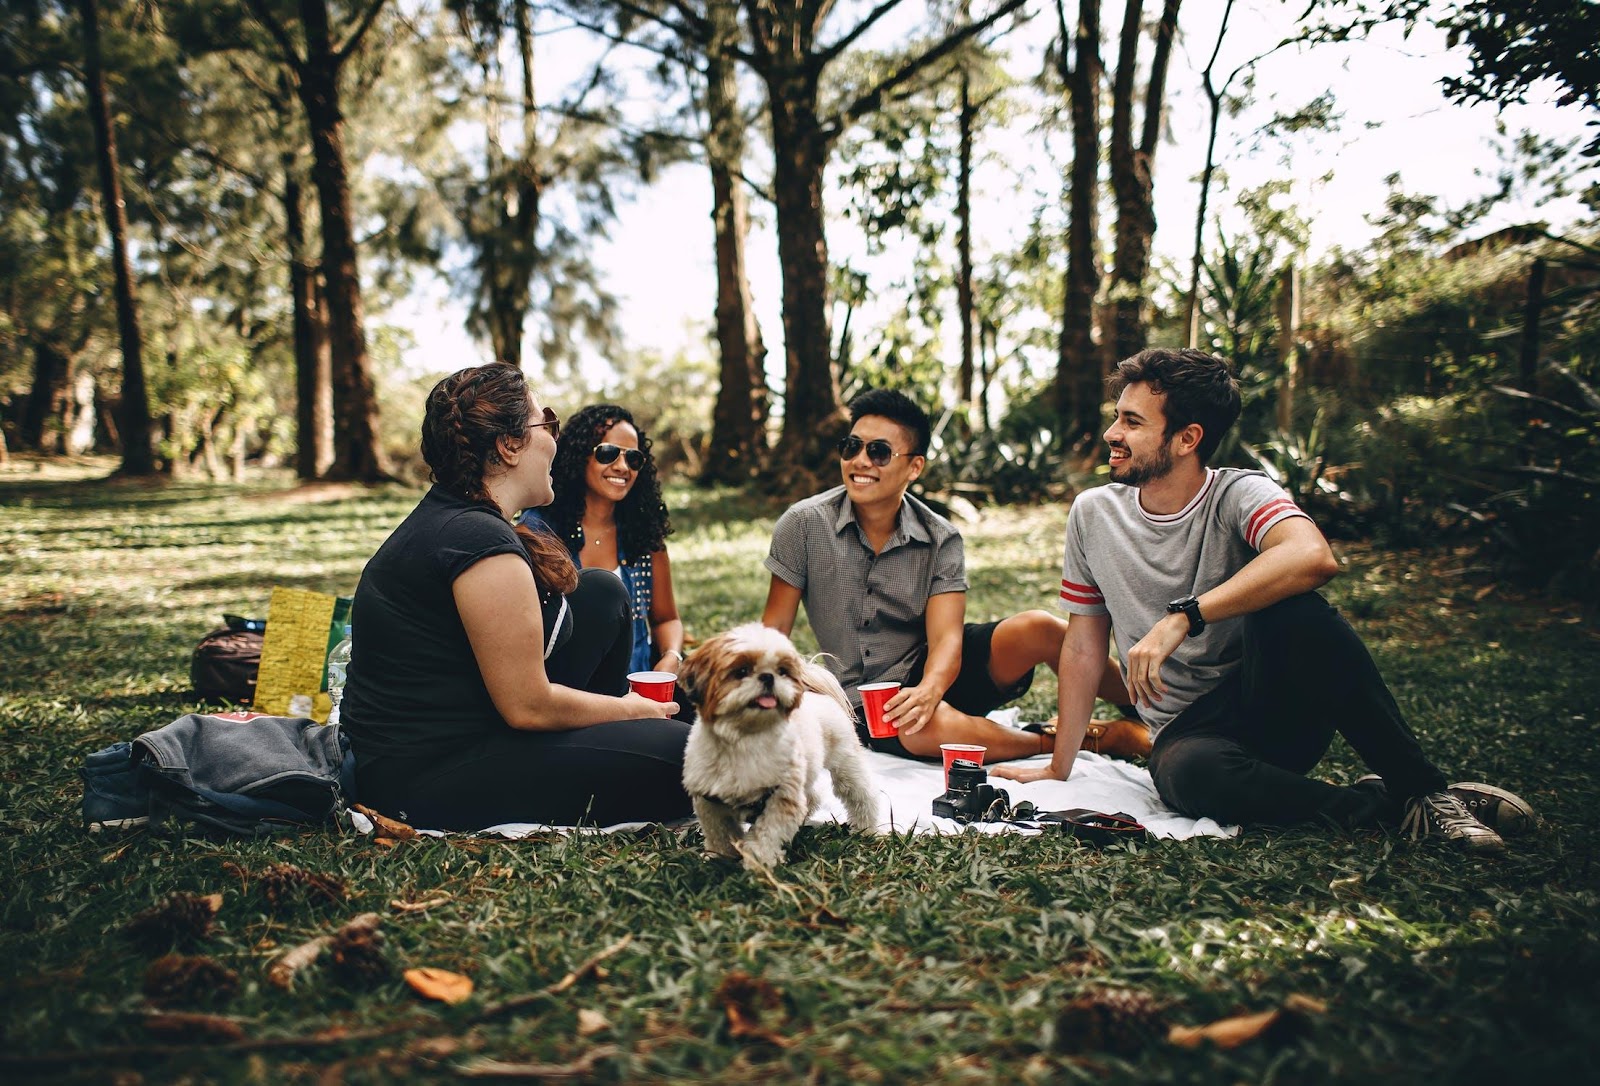 A group of people sitting on the grass with a dog

Description automatically generated